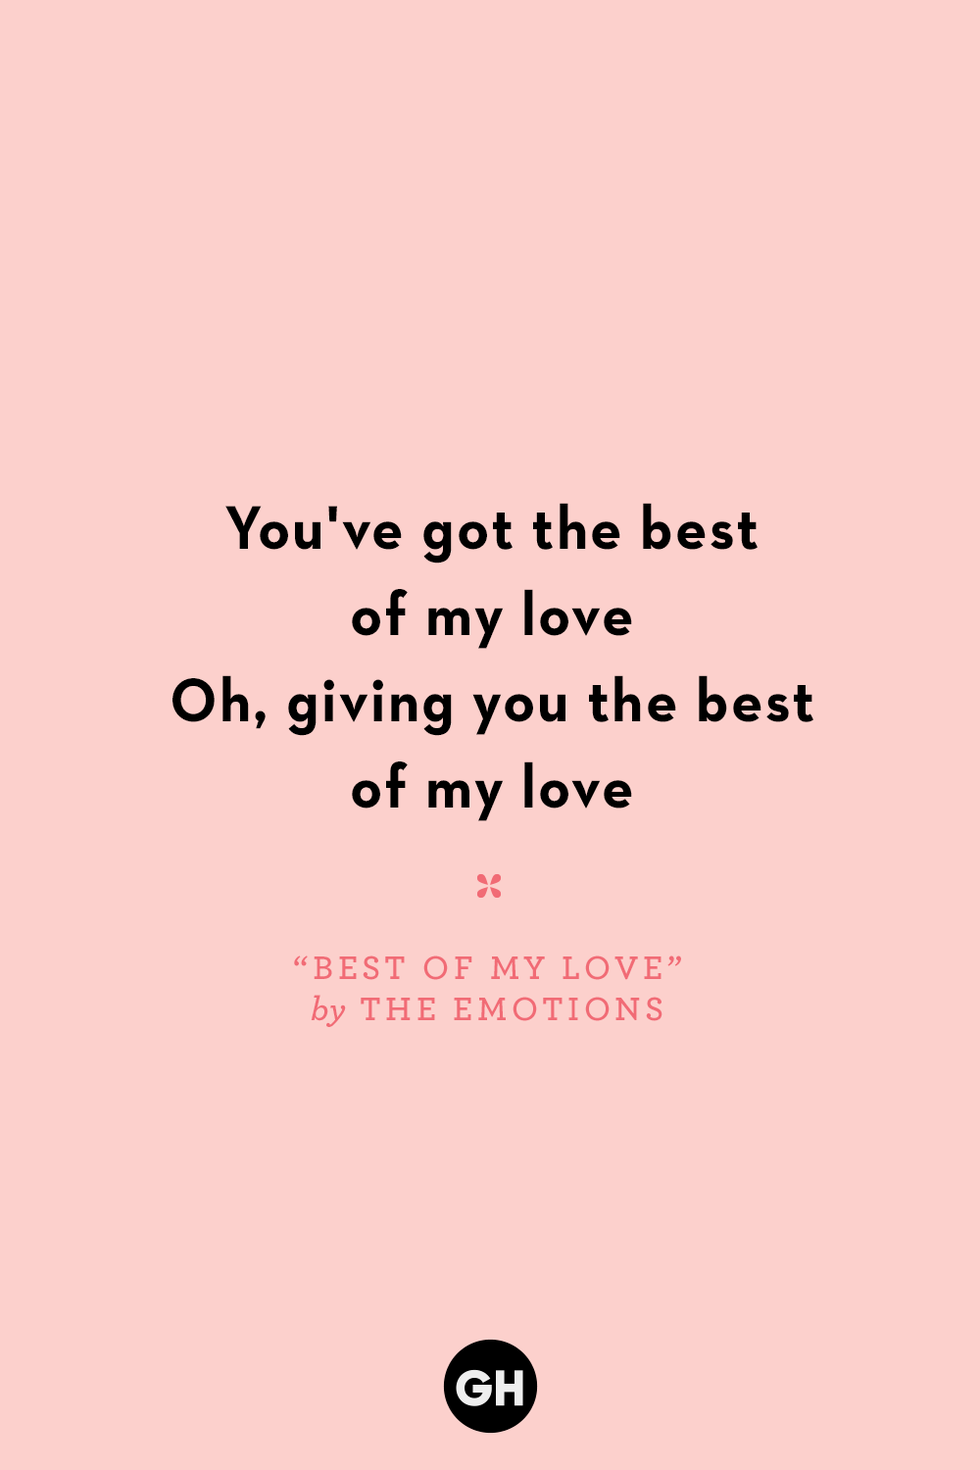 The 74 Most Romantic Love Song Lyrics and Quotes to Share With Your  Valentine